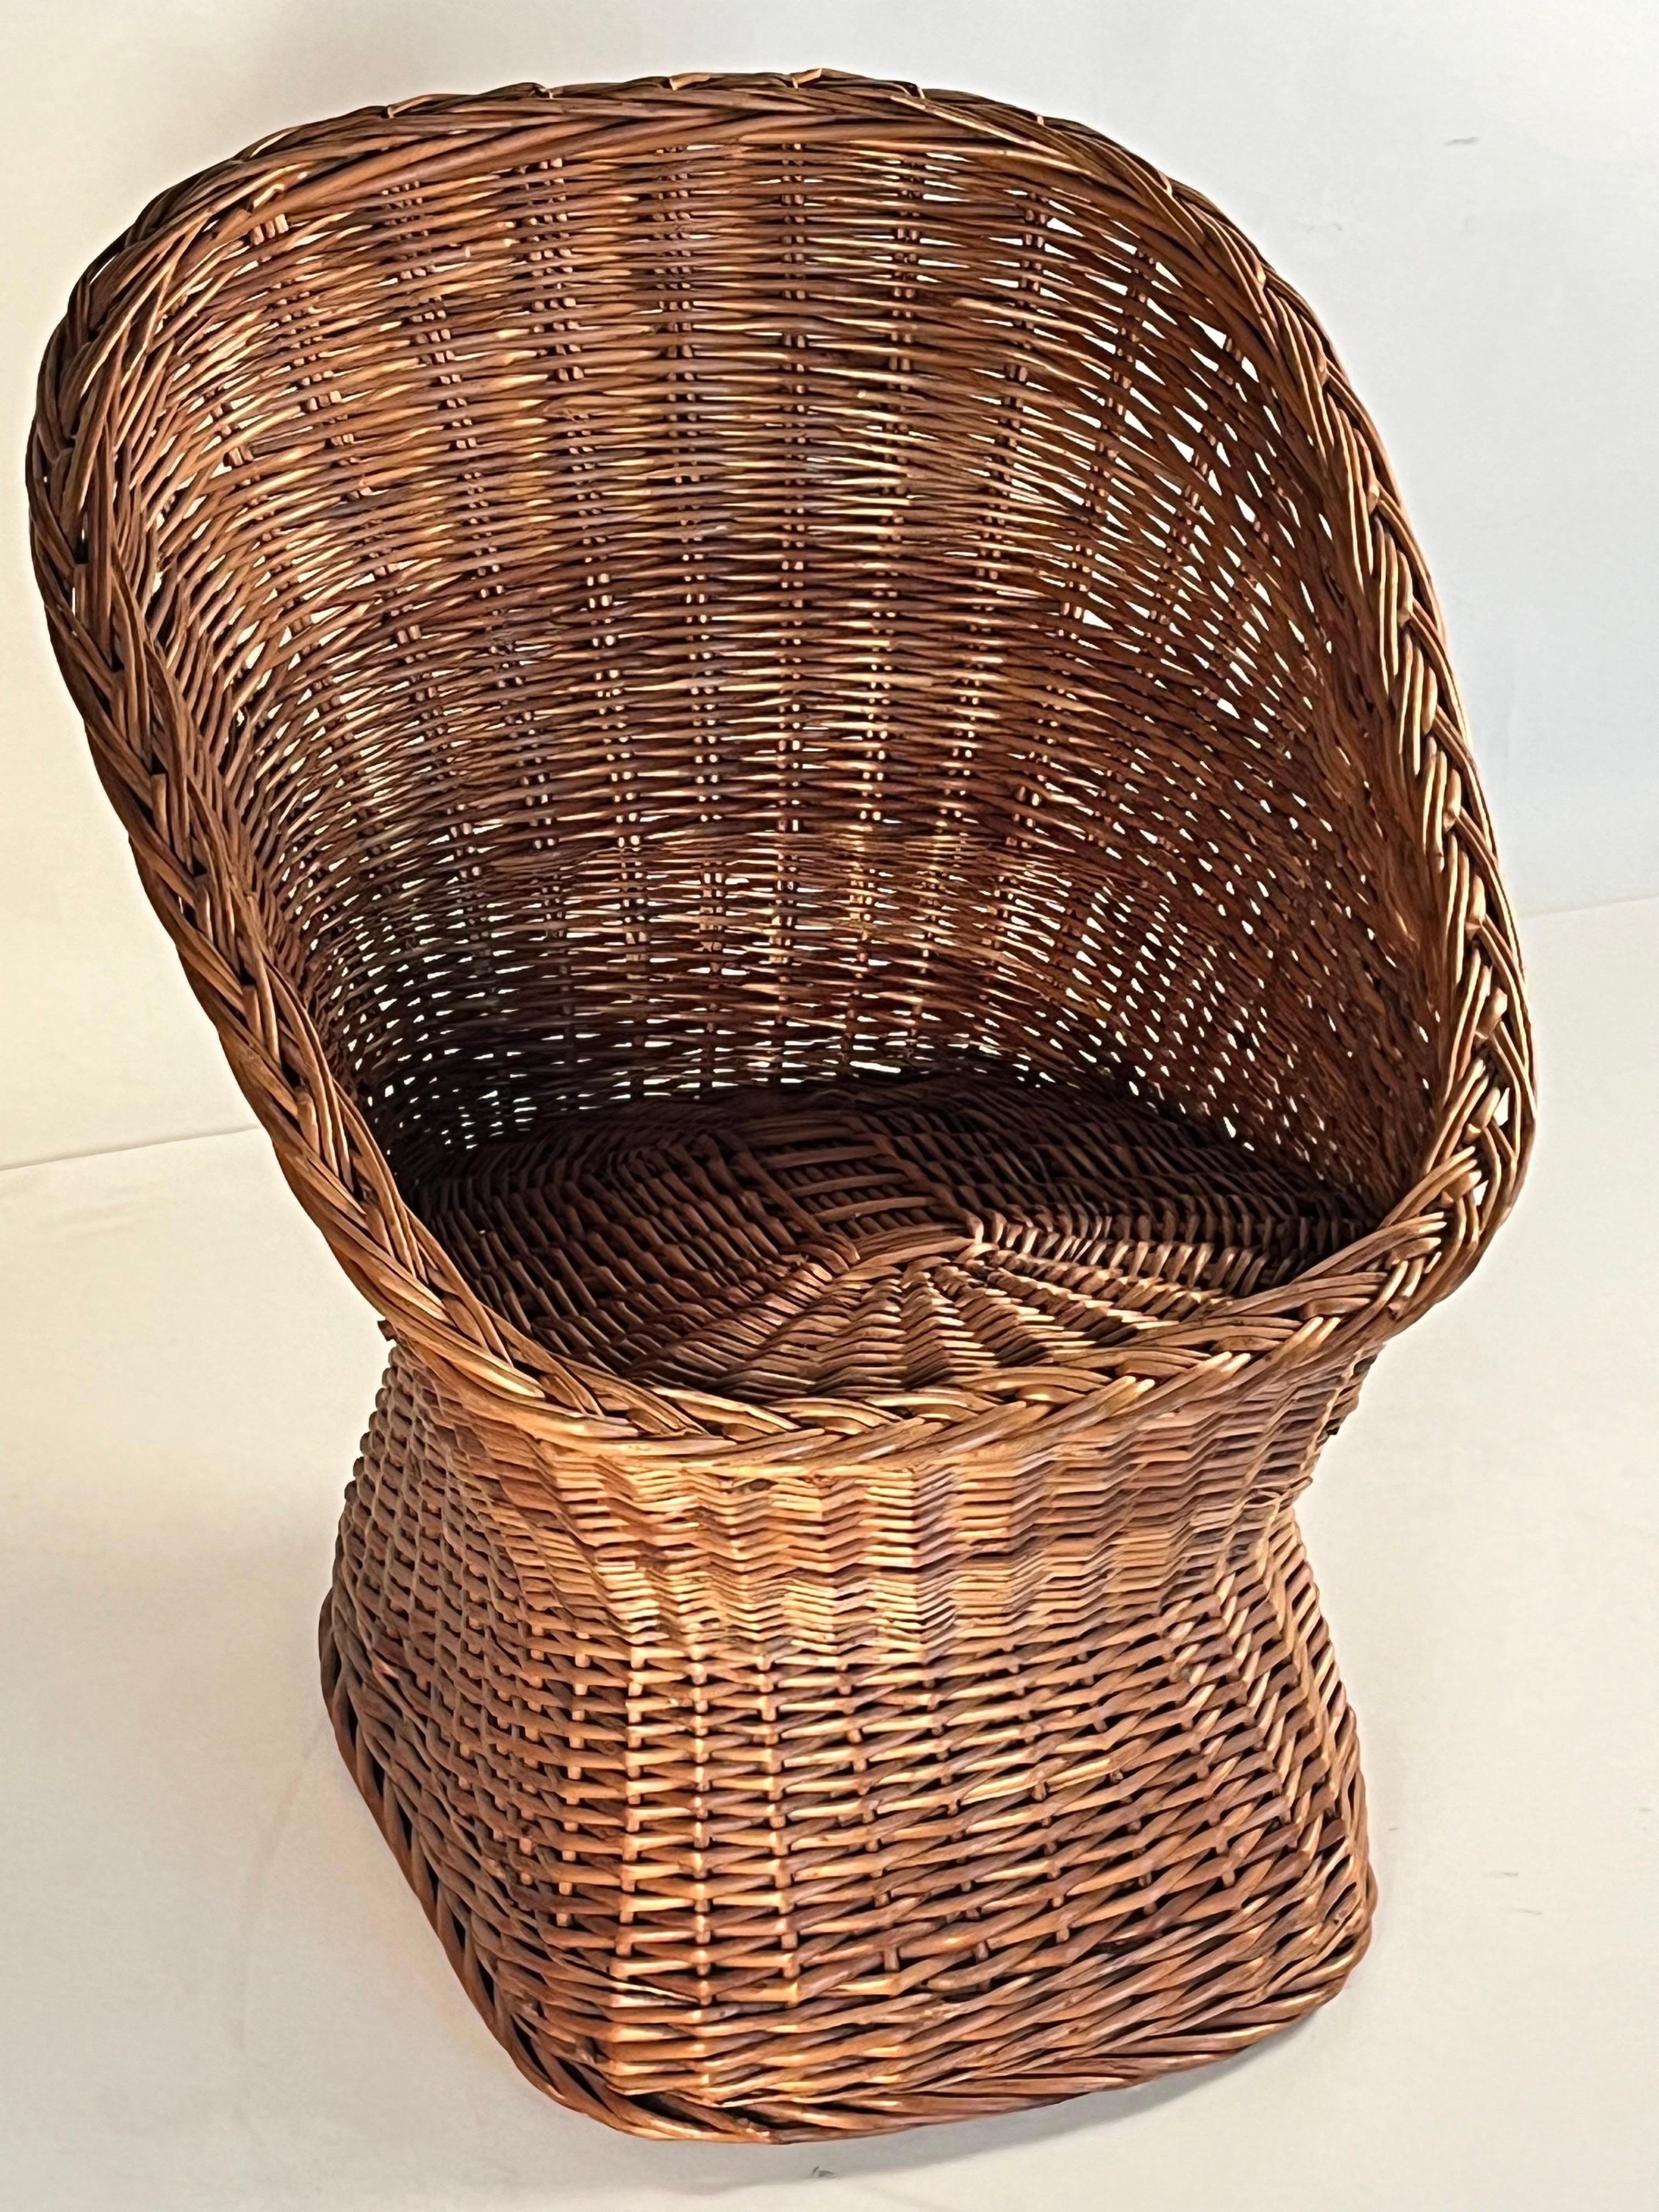 Croatian Woven Rattan Wicker Barrel Chair with Shearling Pad For Sale